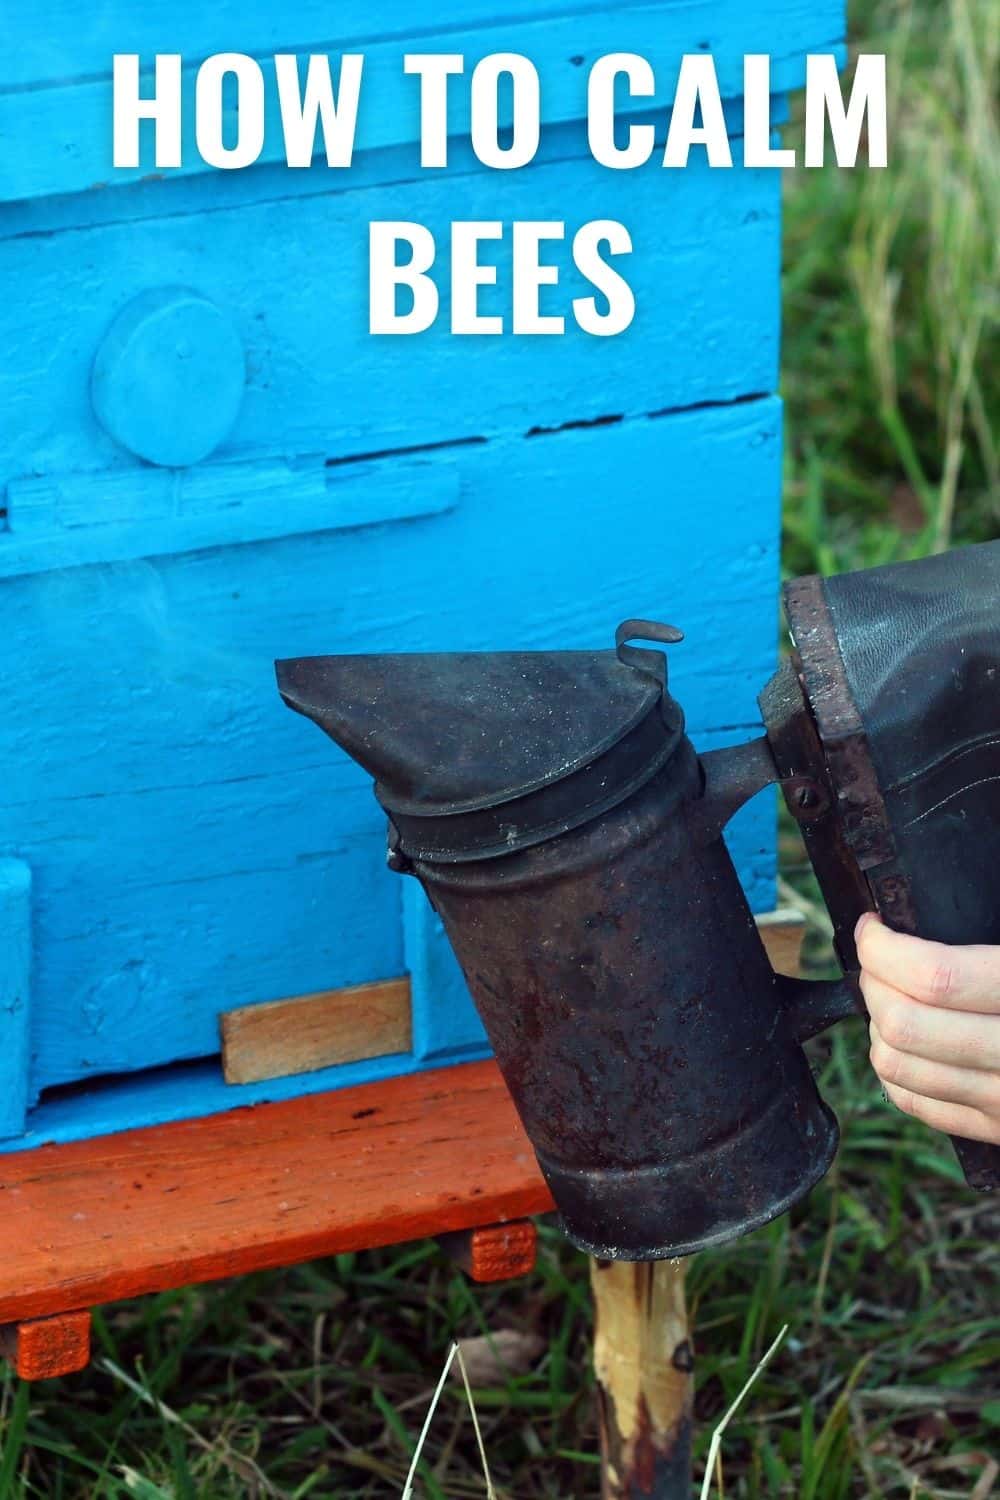 How to calm bees